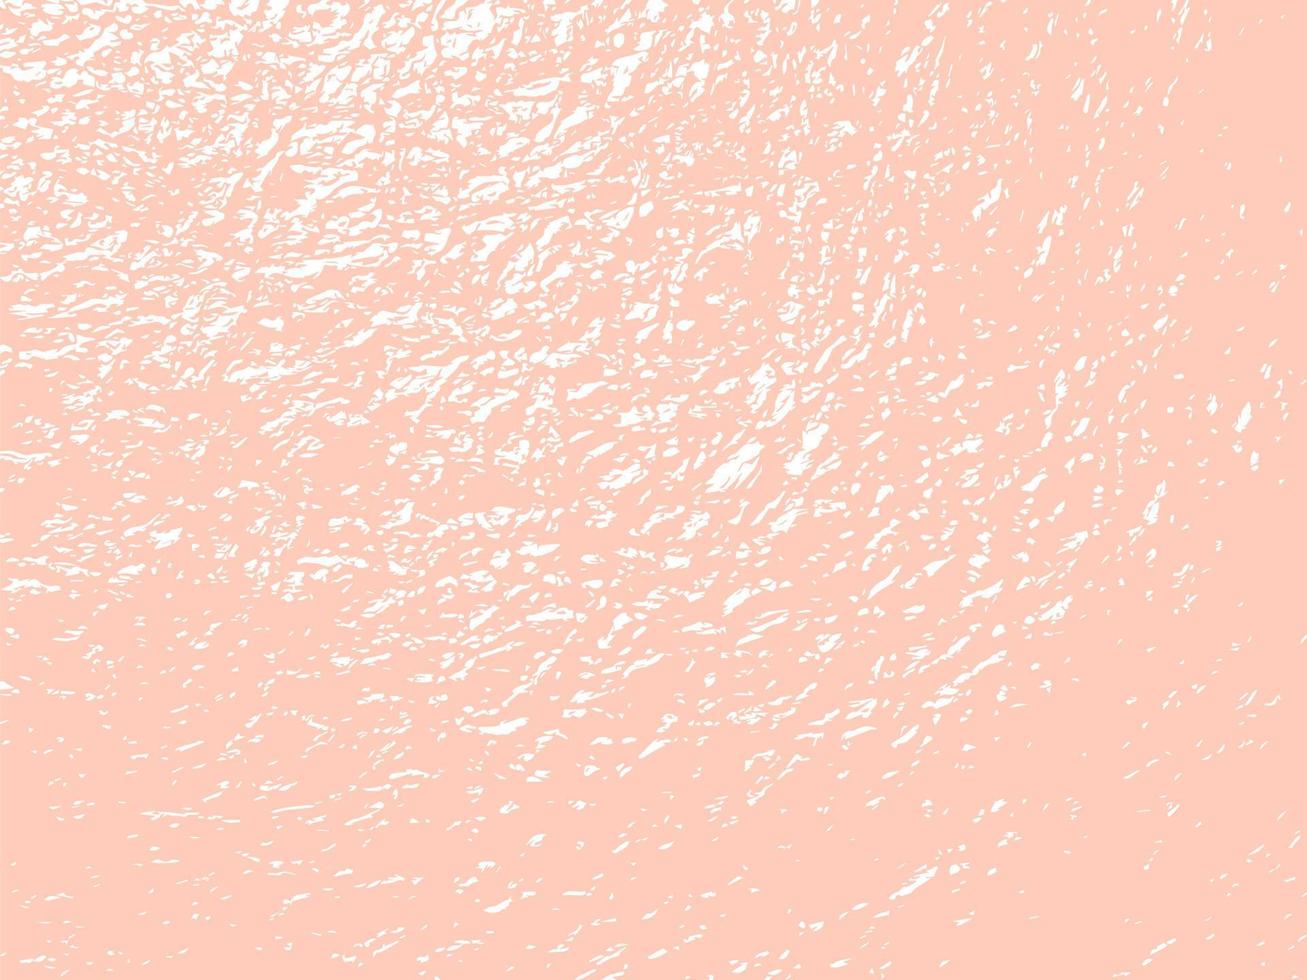 Paint texture. Distress grunge background. Scratches, grain, noise rectangle stamp. Colored crumpled . Place the art on top of the object to create an abstract vector with a grunge effect.